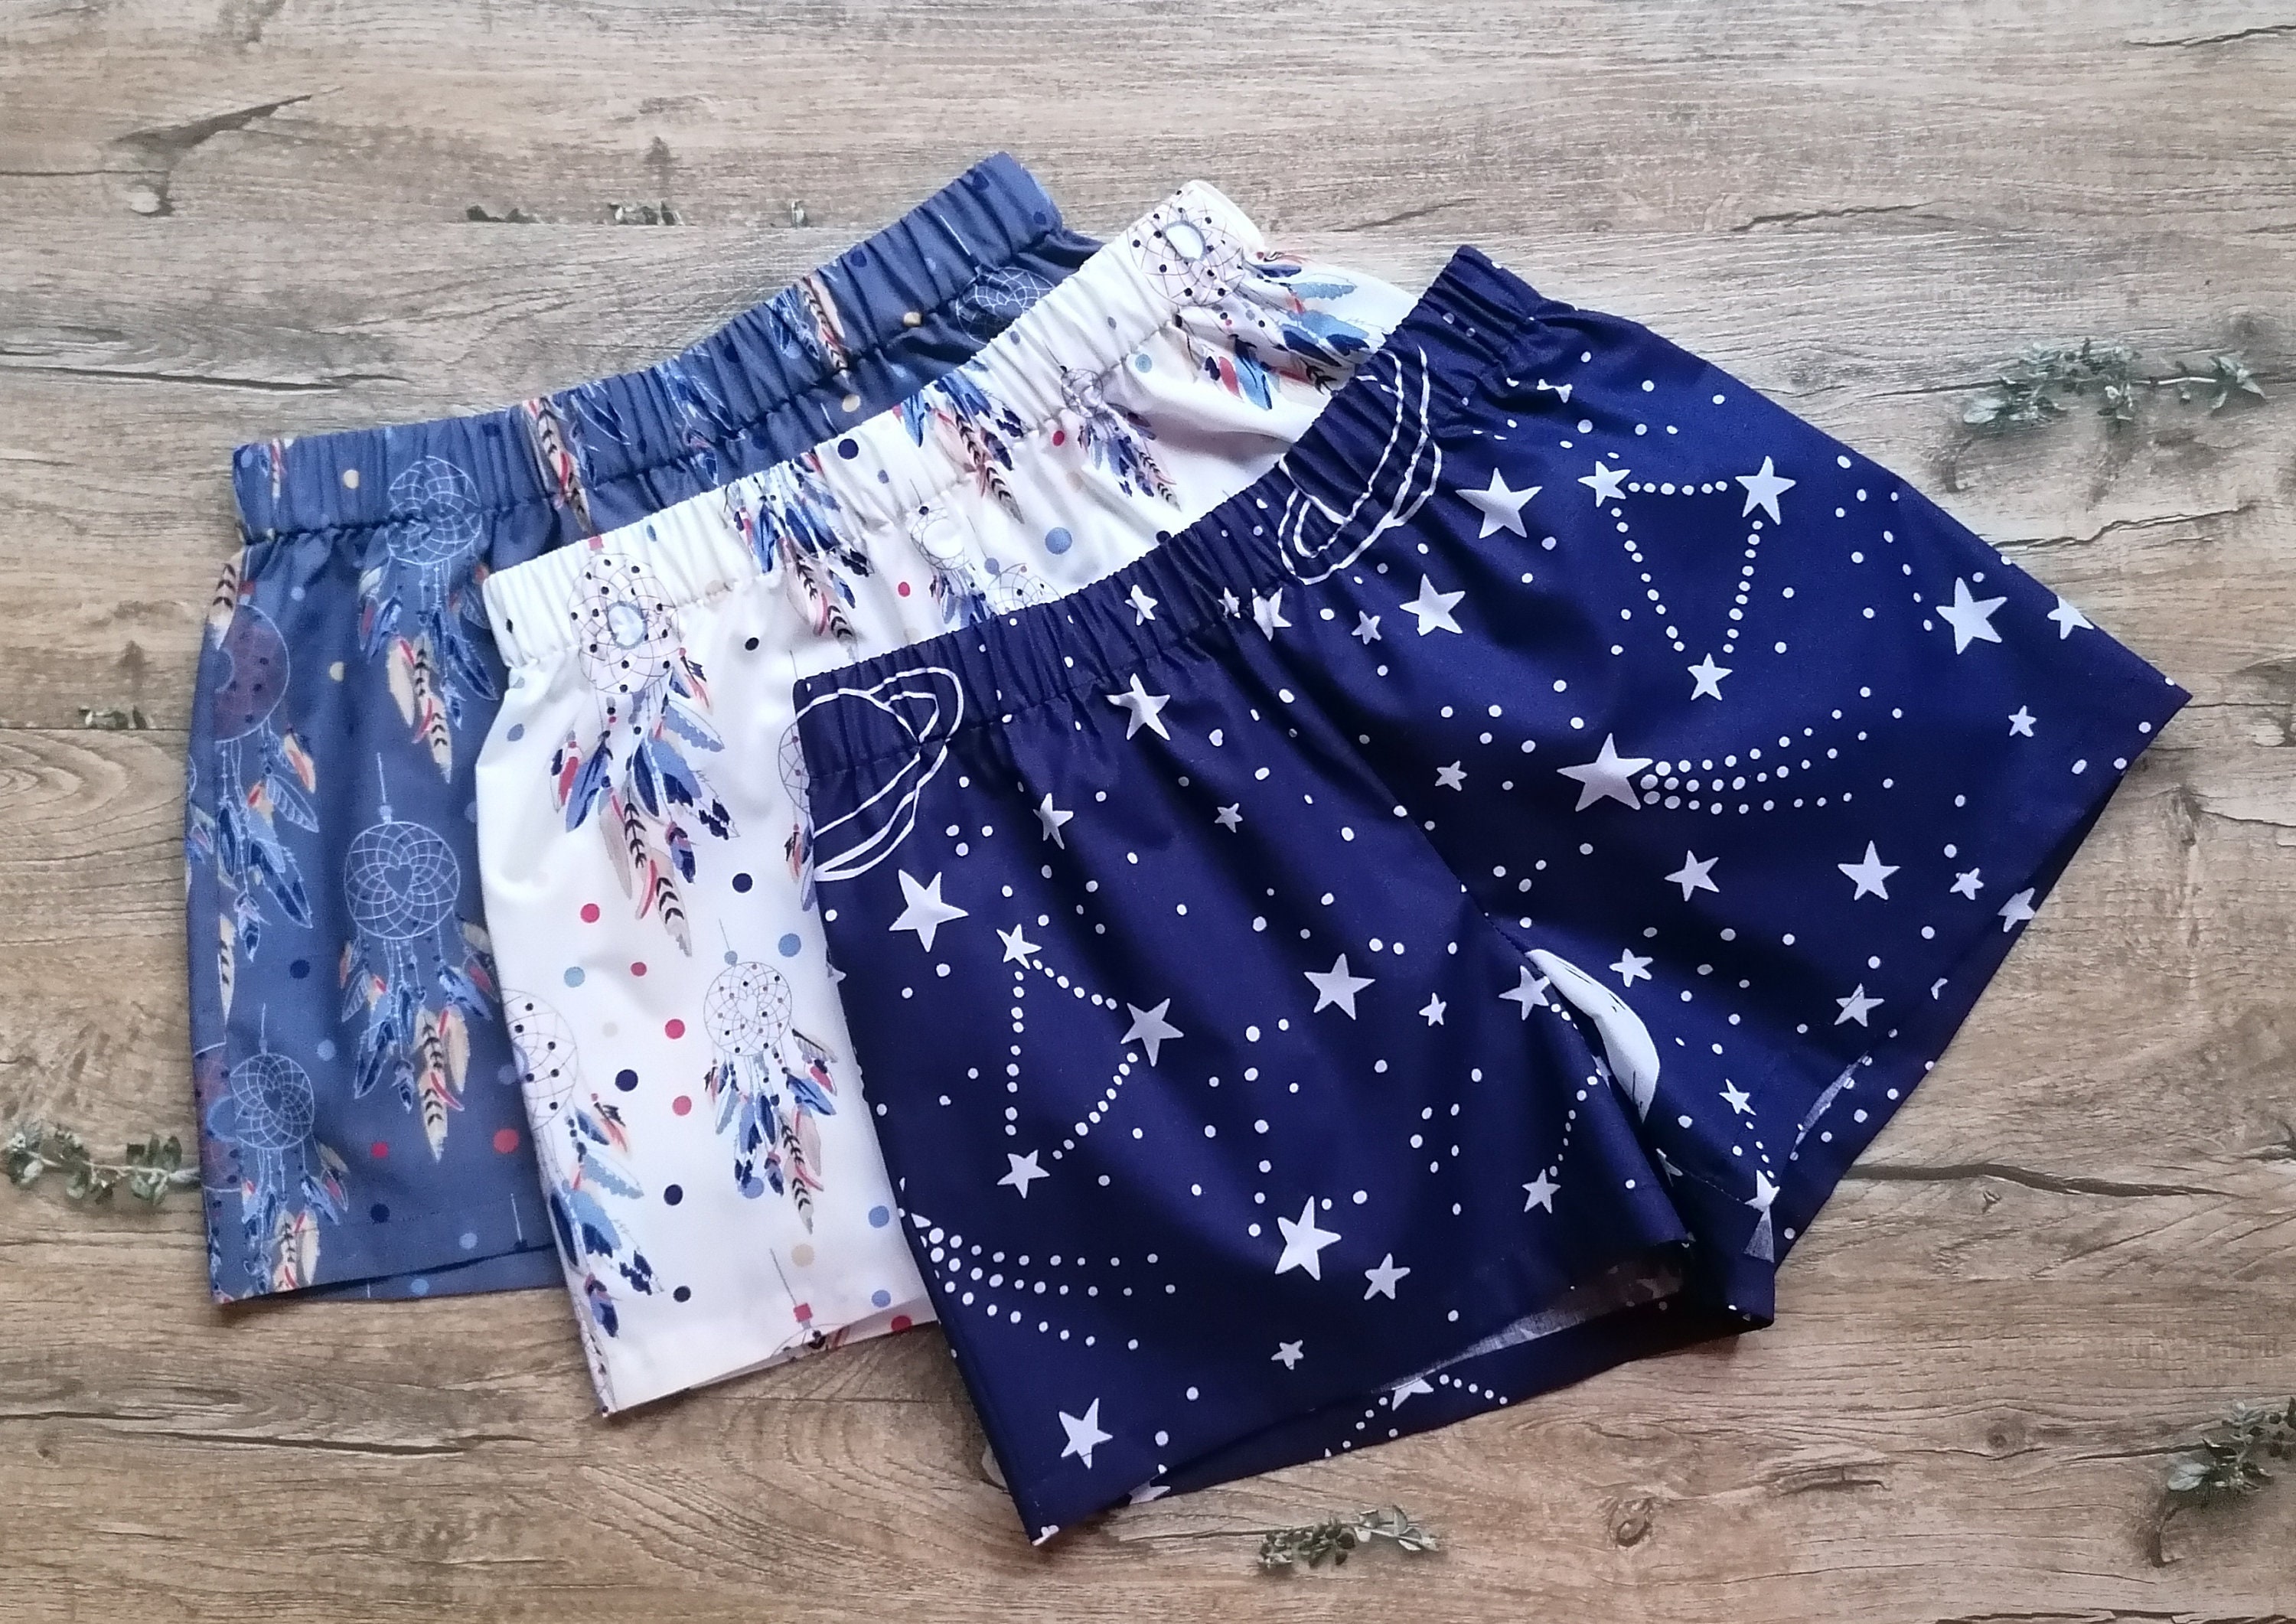 pajama shorts boxer shorts plus size shorts Set of 3 cotton sleep shorts with dreamcatchers cosmos and hearts print